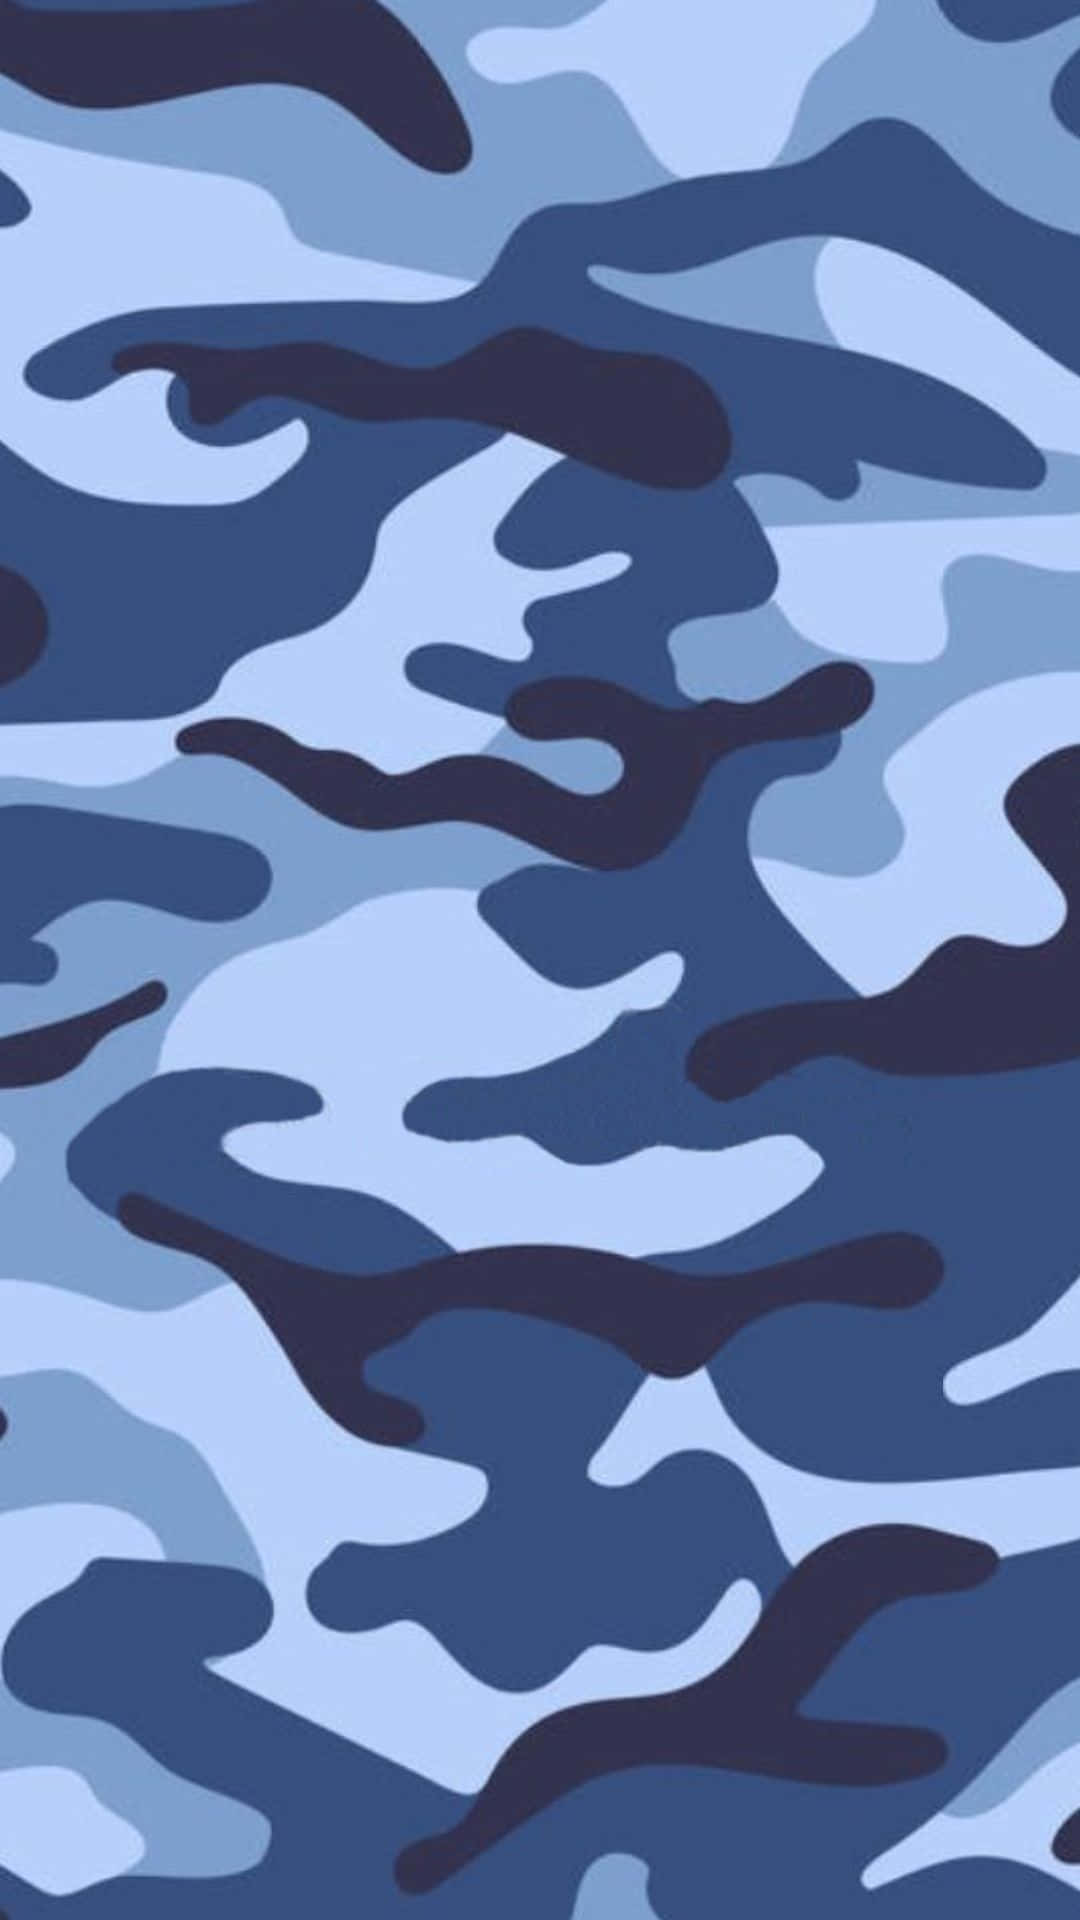 A Blue Camouflage Pattern Wallpaper